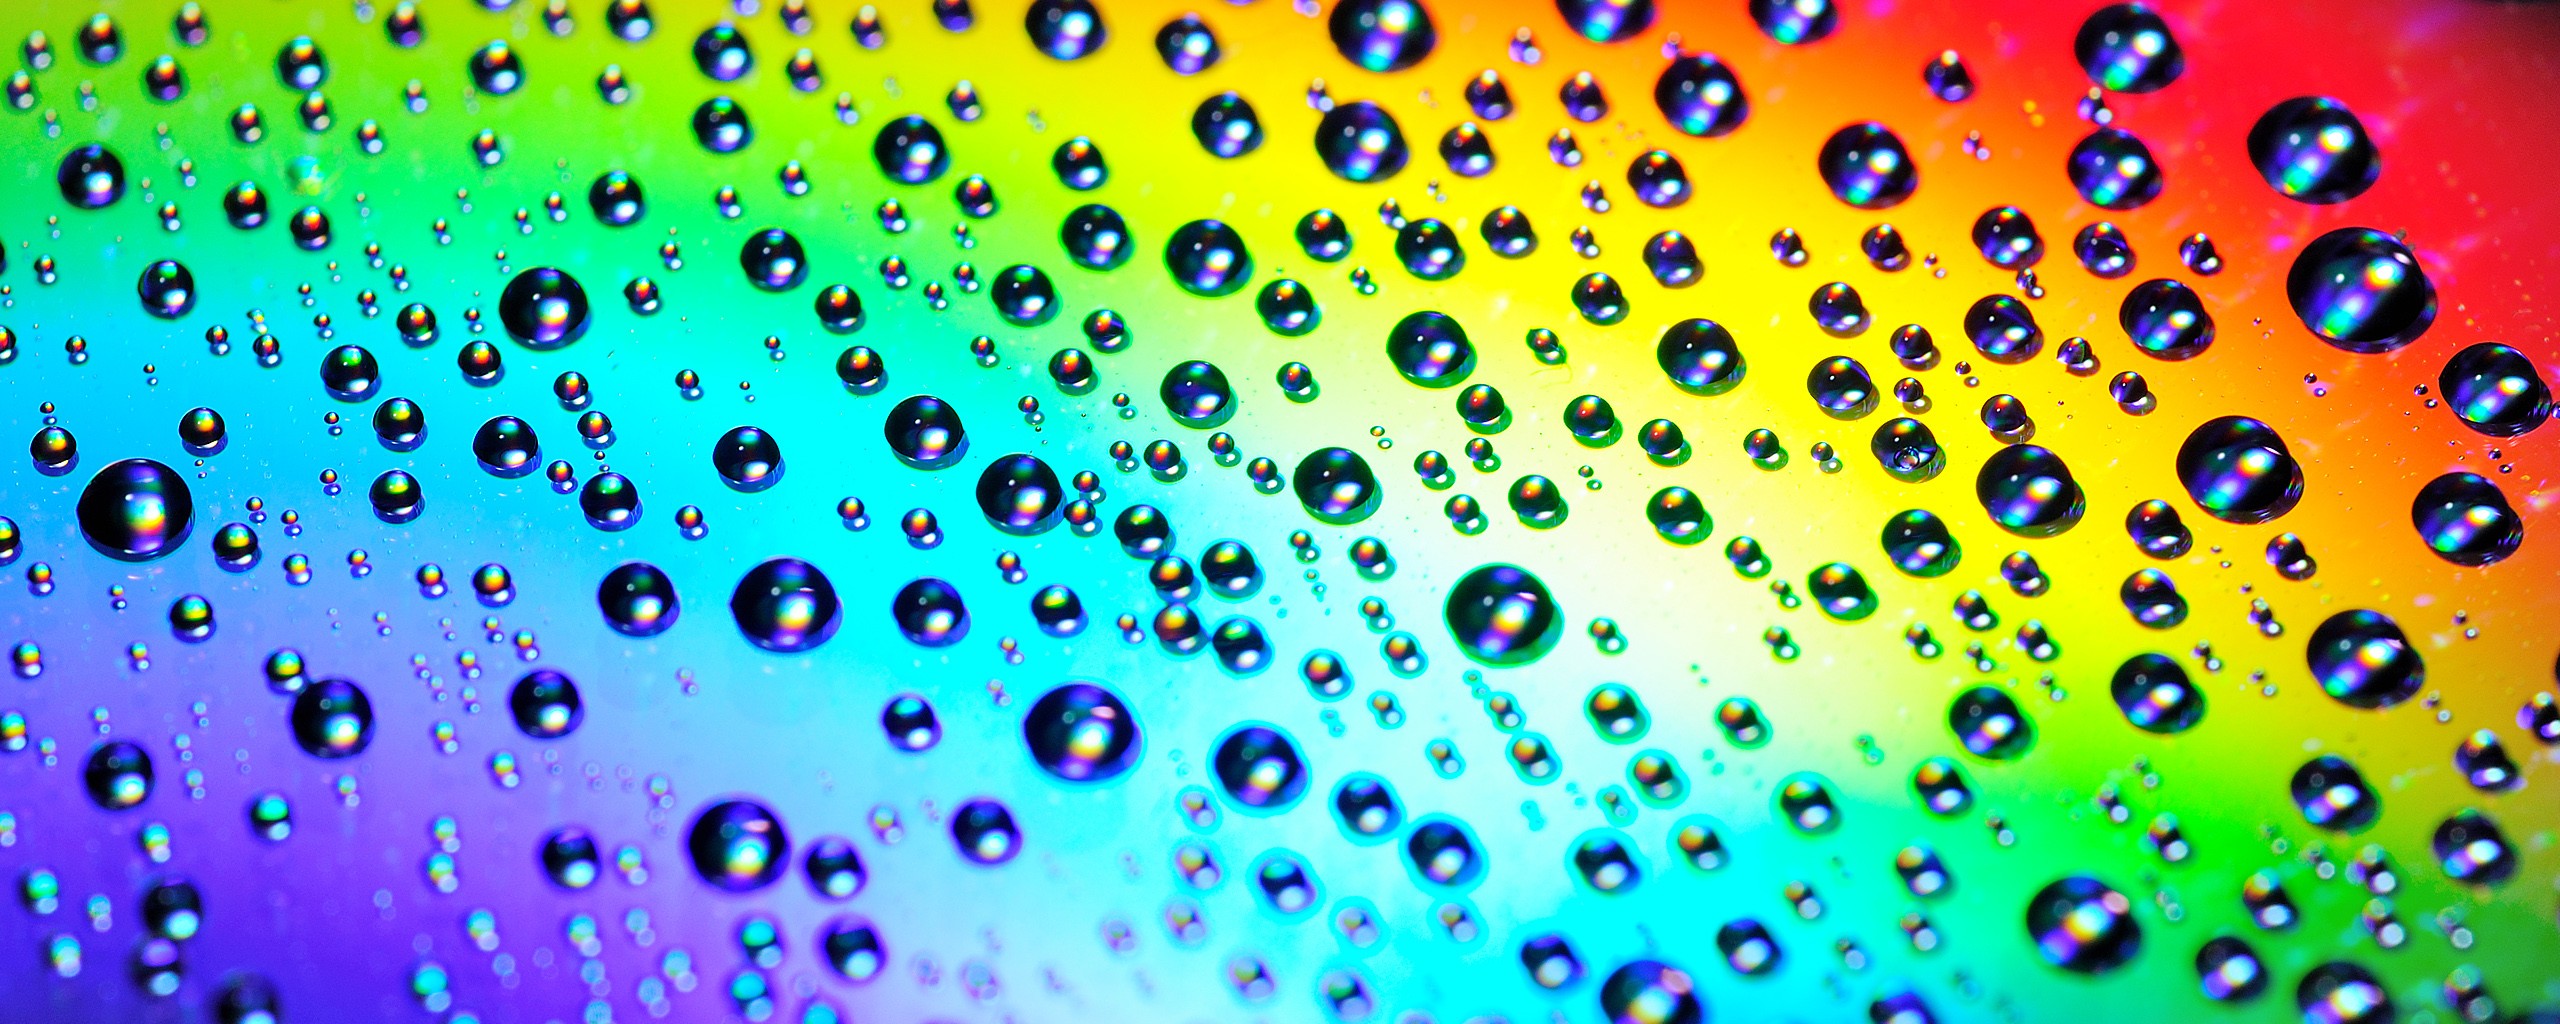 General 2560x1024 water drops rainbows simple background colorful